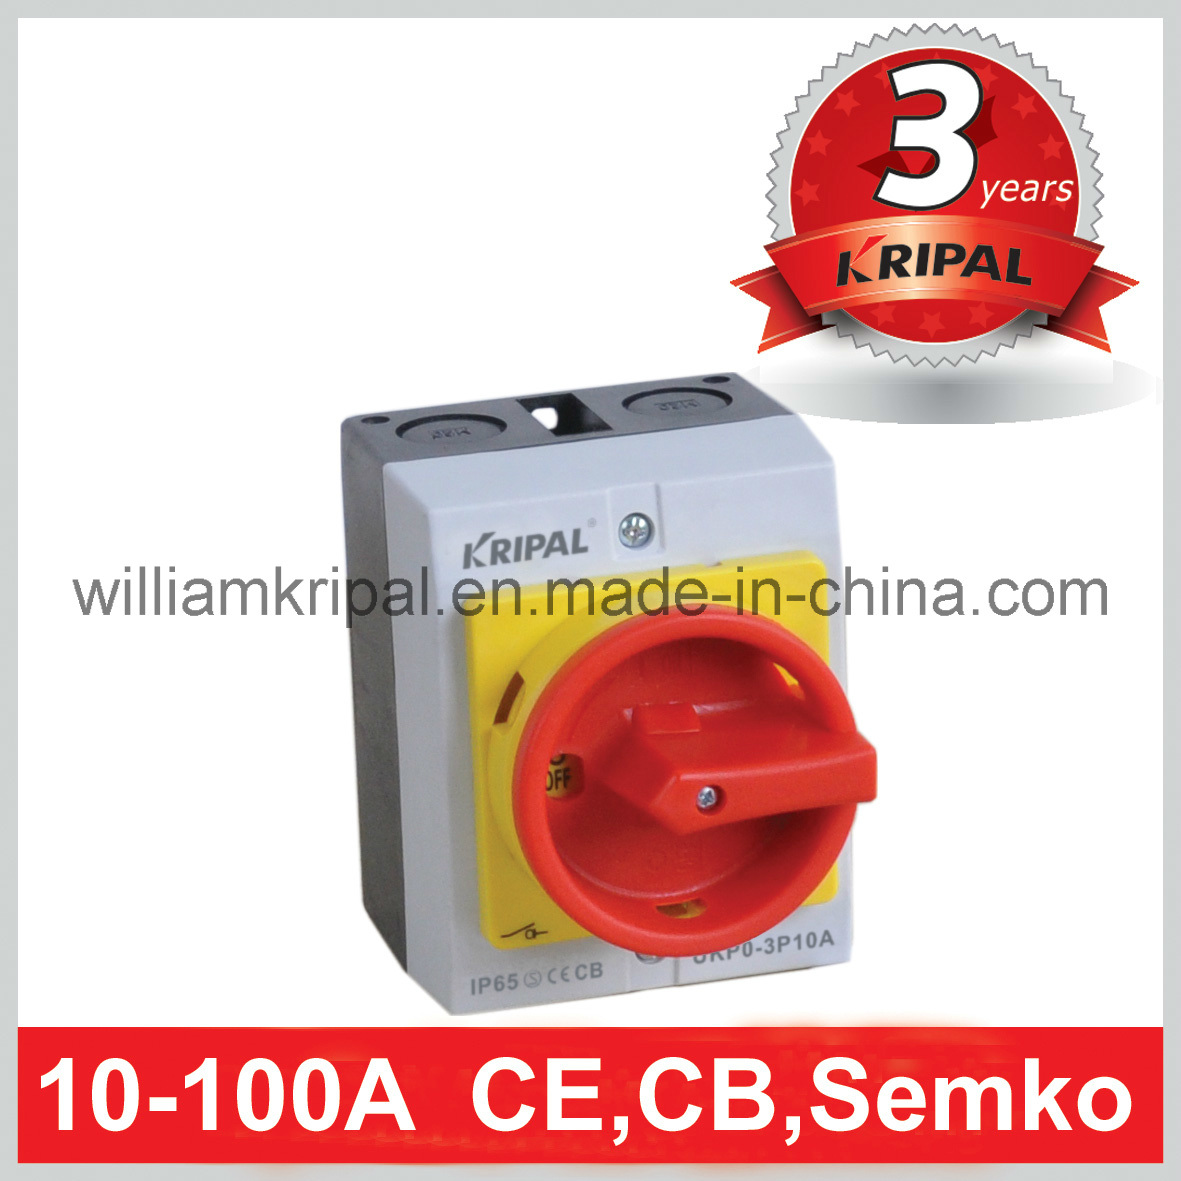 IP65 PC Enclosed Rotary Switch